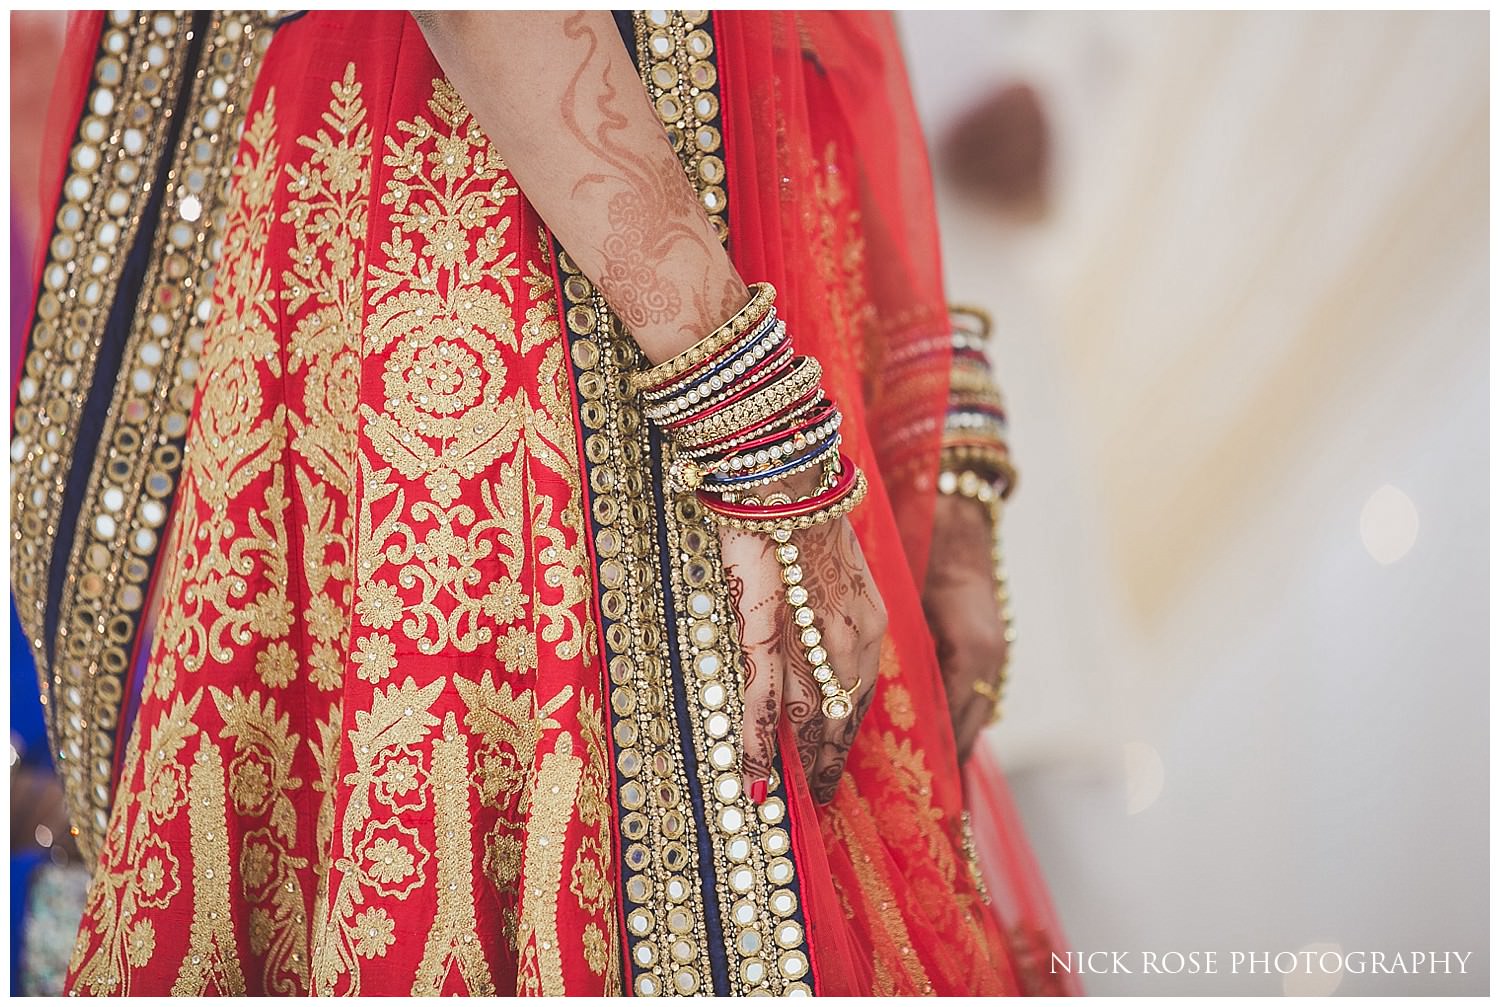  Brides hands with mehndi and bangles during a London Hindu wedding ceremony 